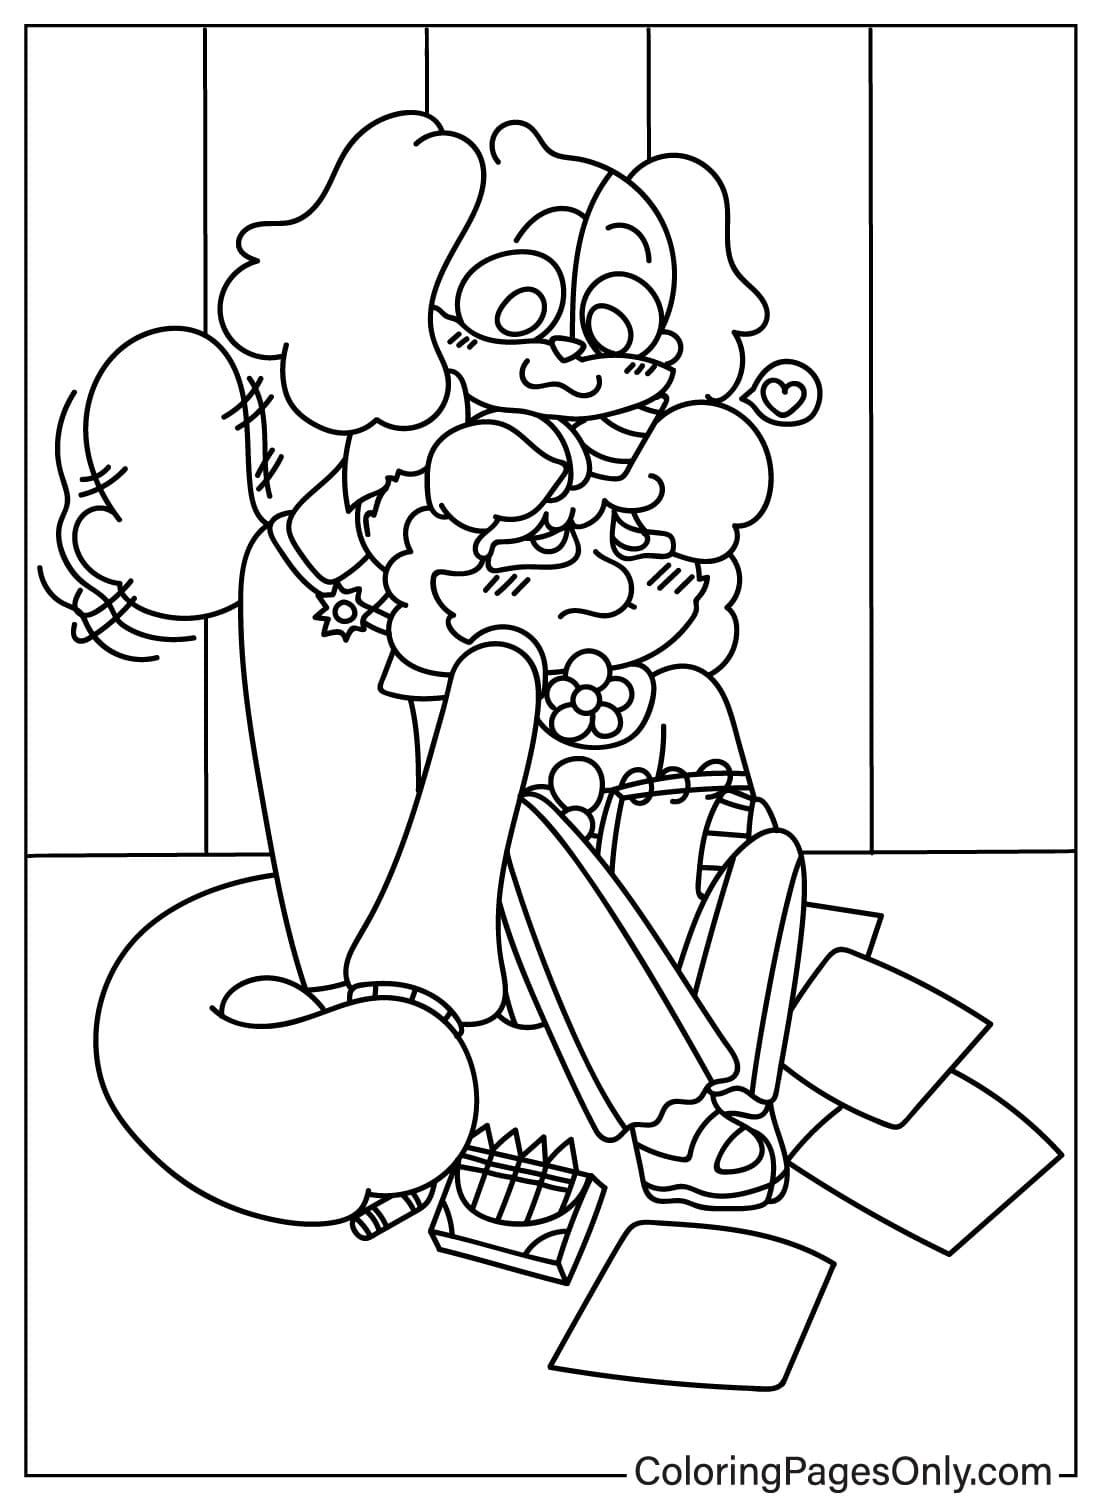 DogDay and CraftyCorn Coloring Page from CraftyCorn